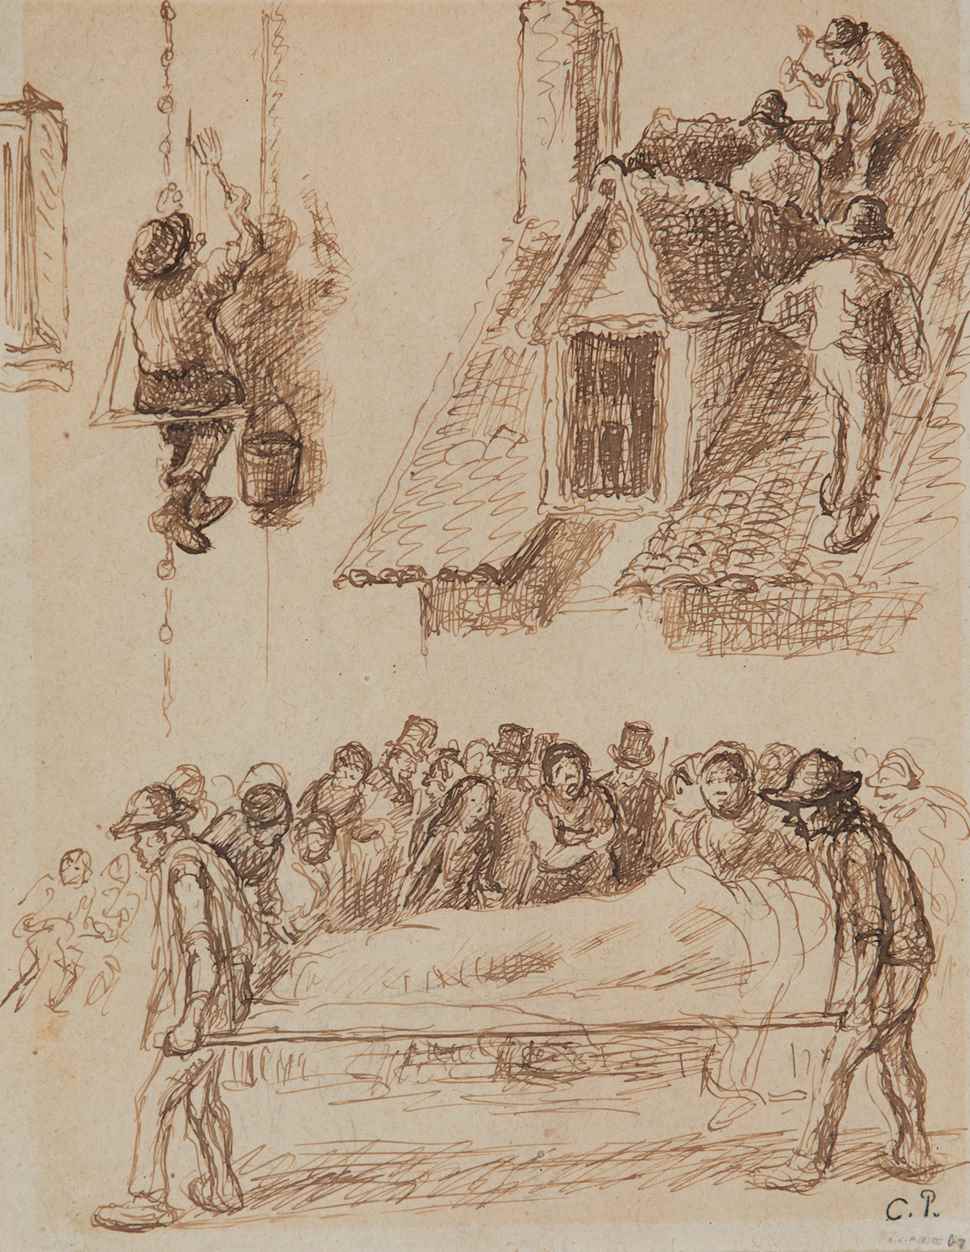 Study from Les Turpitudes Sociales - Camille Pissarro (1830 - 1903)